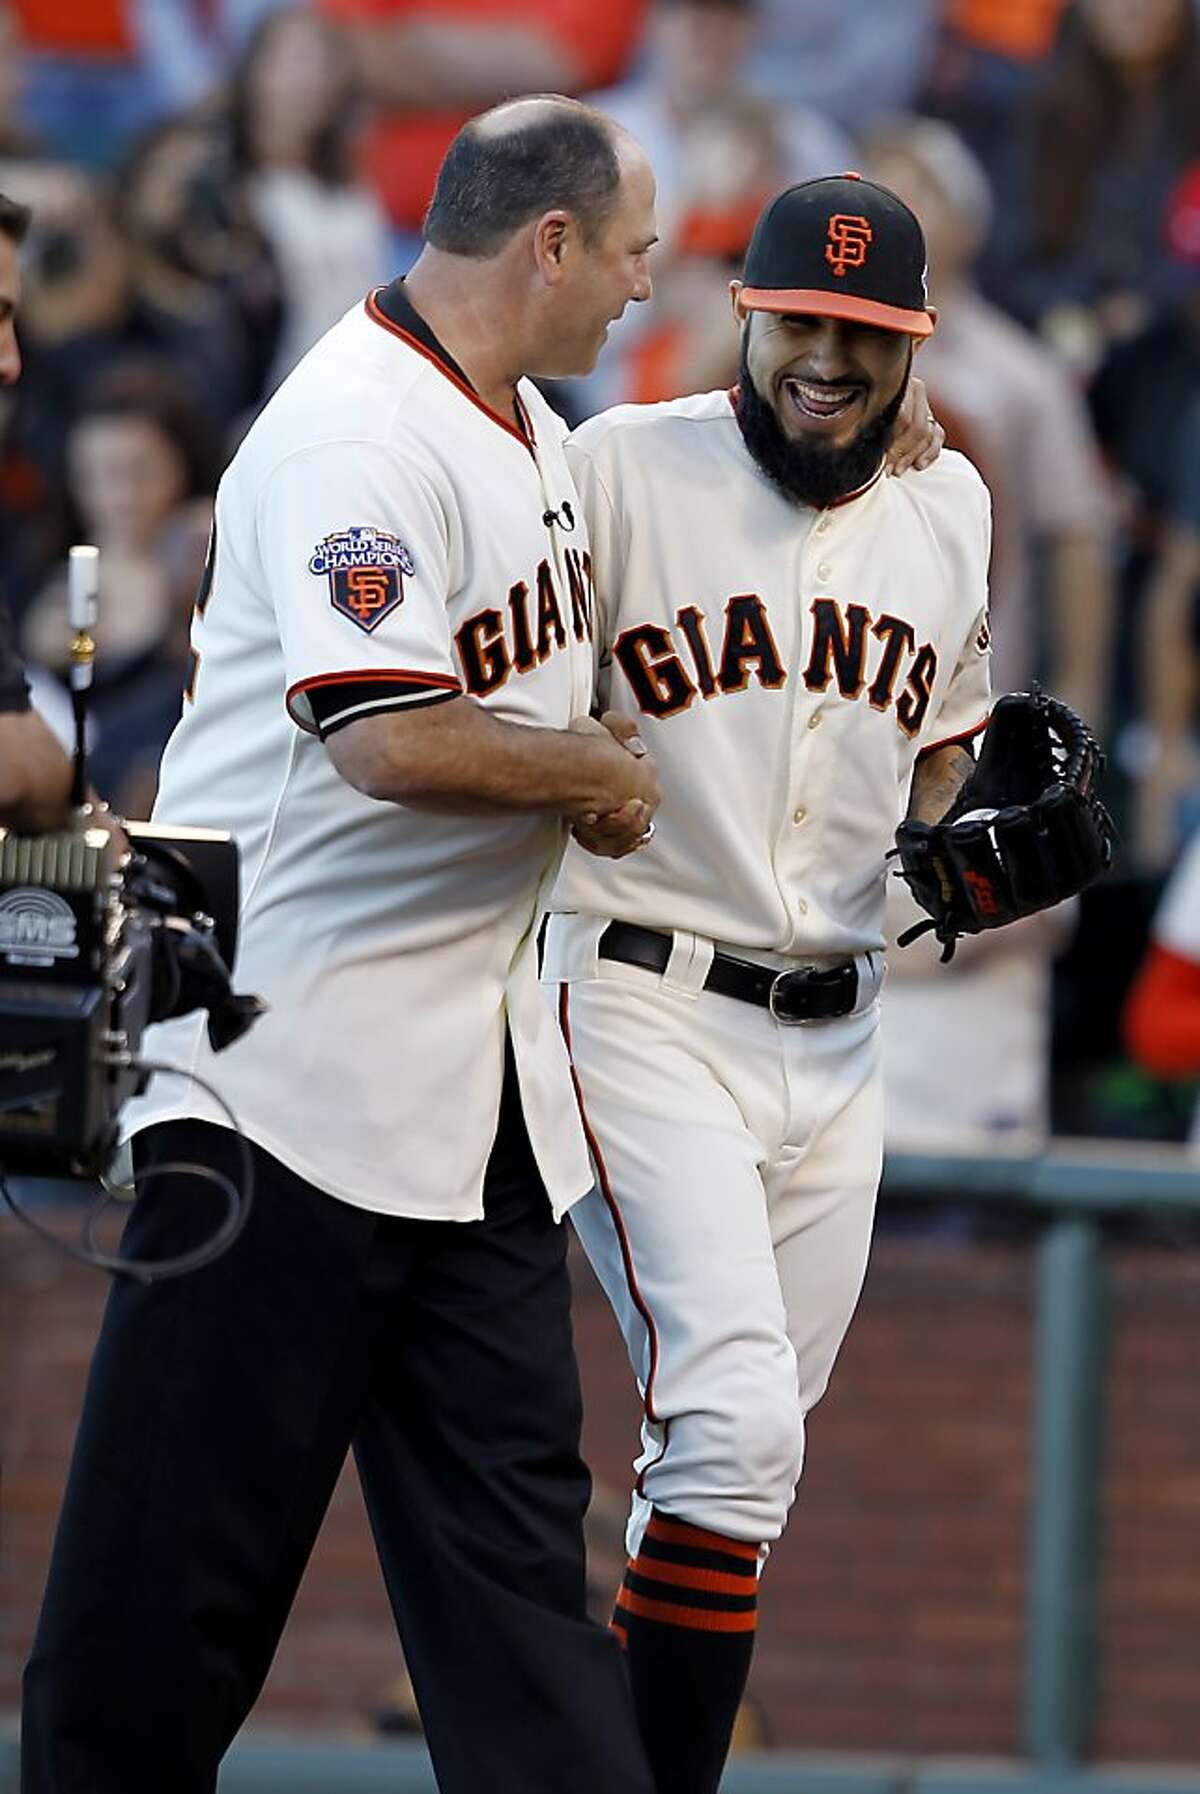 Will Clark (left) threw out the first pitch to pitcher Sergio Romo, they joked about it afterward. The San Francisco Giants lost 6-4 to the St. Louis Cardinals in the first game of the league championship series Sunday Octboer 14, 2012 at AT&T park.